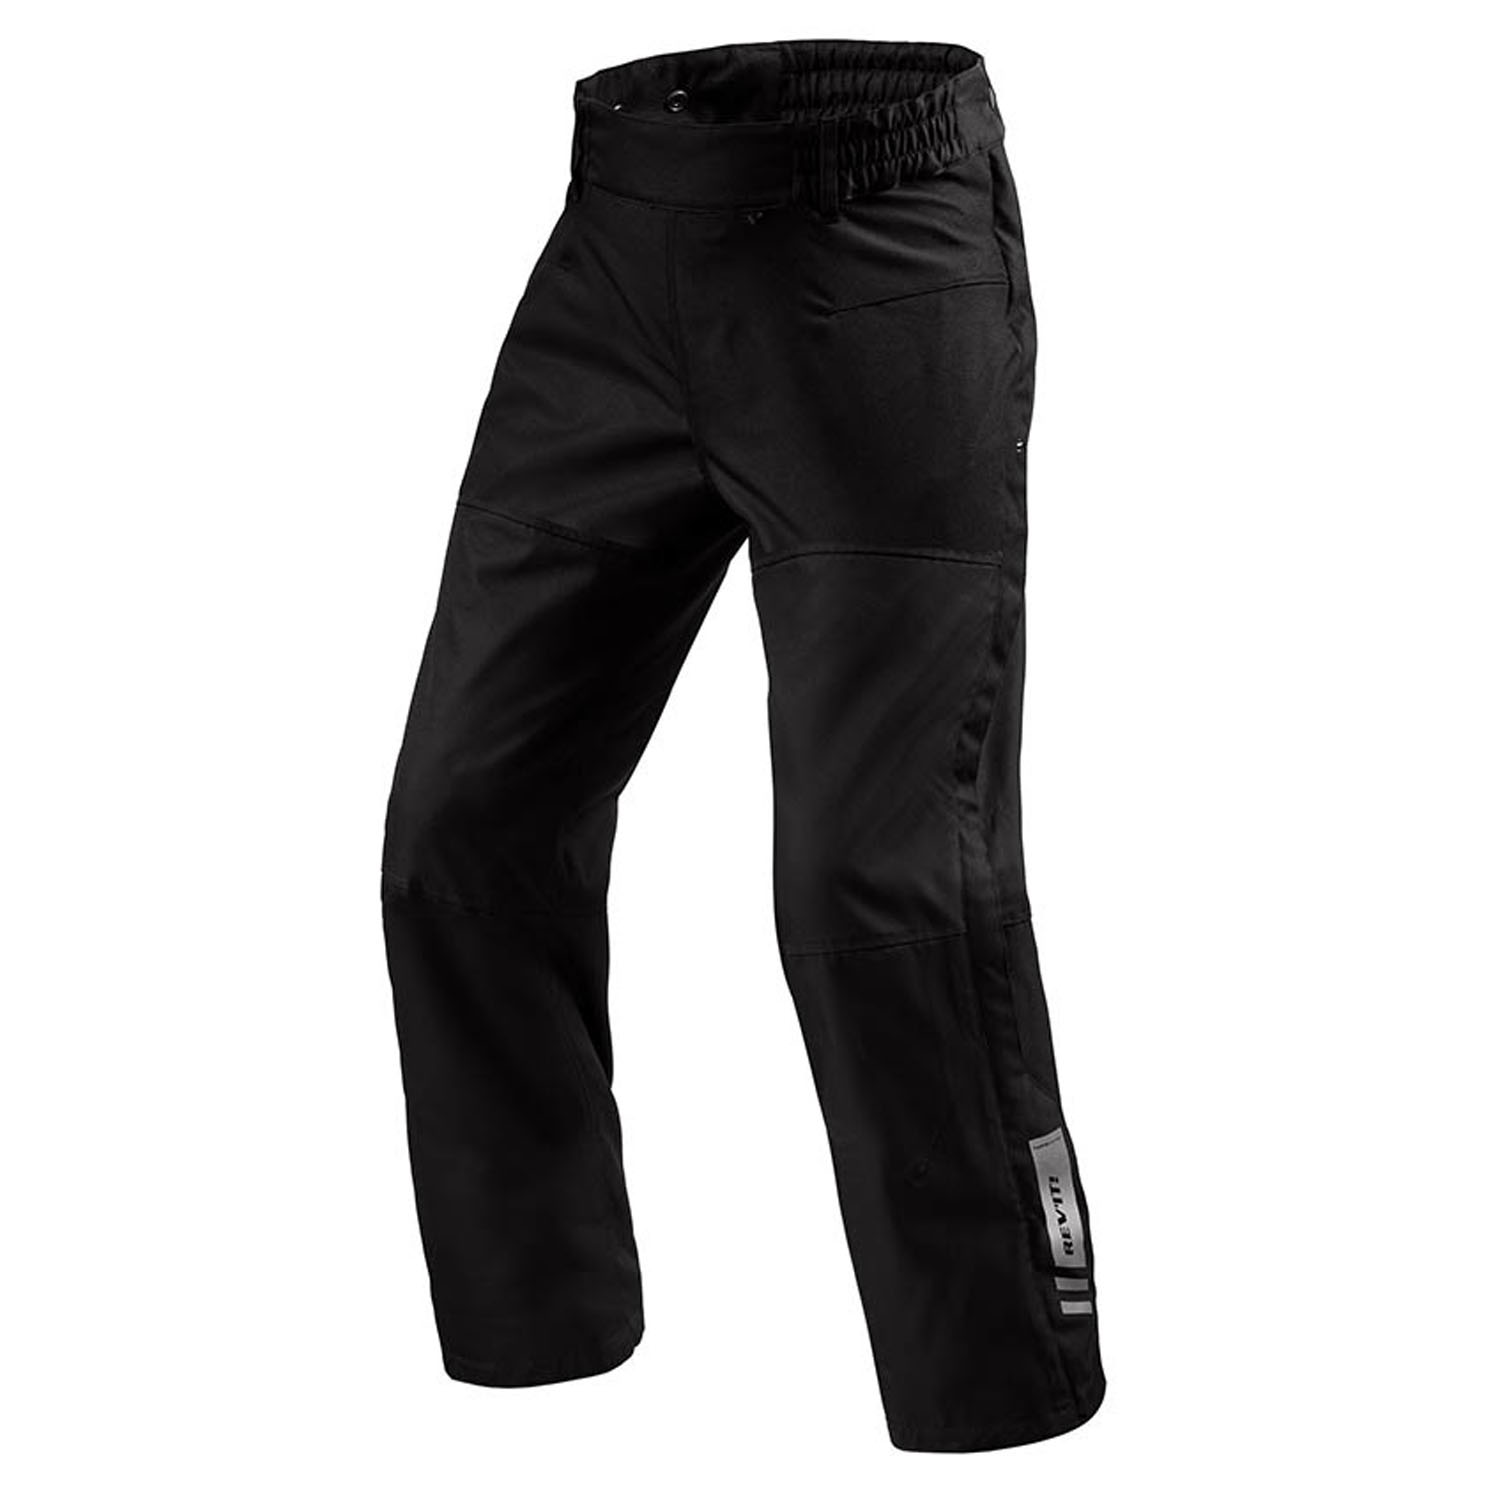 Image of REV'IT! Pants Axis 2 H2O Black Standard Motorcycle Pants Taille XS